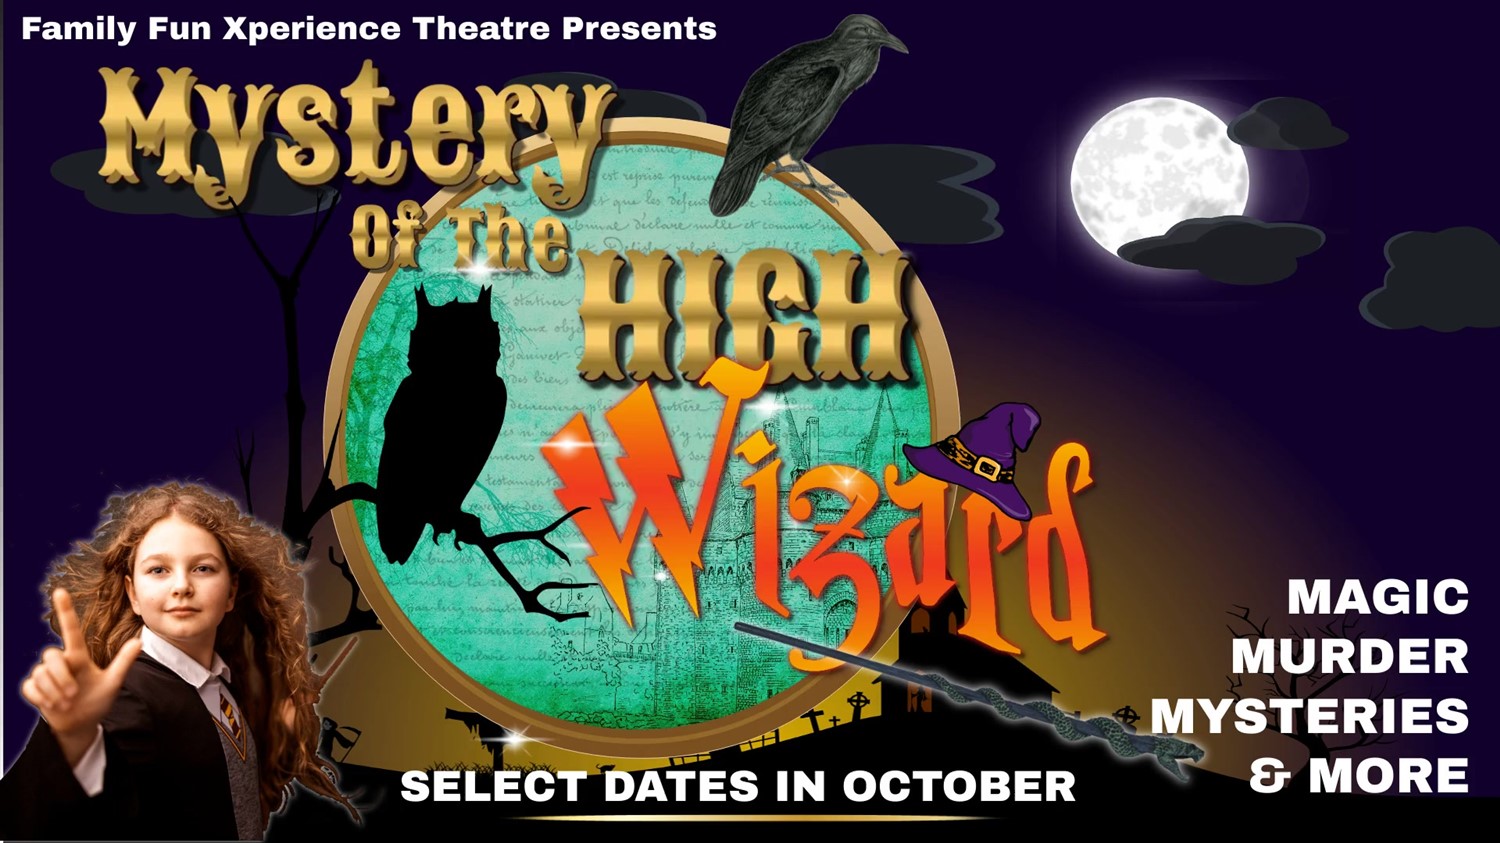 🗝 MYSTERY of the HIGH WIZARD⚡️ Magic, Murder, Mysteries, and More to solve! on oct. 29, 19:00@FFX Theatre - Pick a seat, Buy tickets and Get information on Family Fun Xperience tickets.ffxshow.org